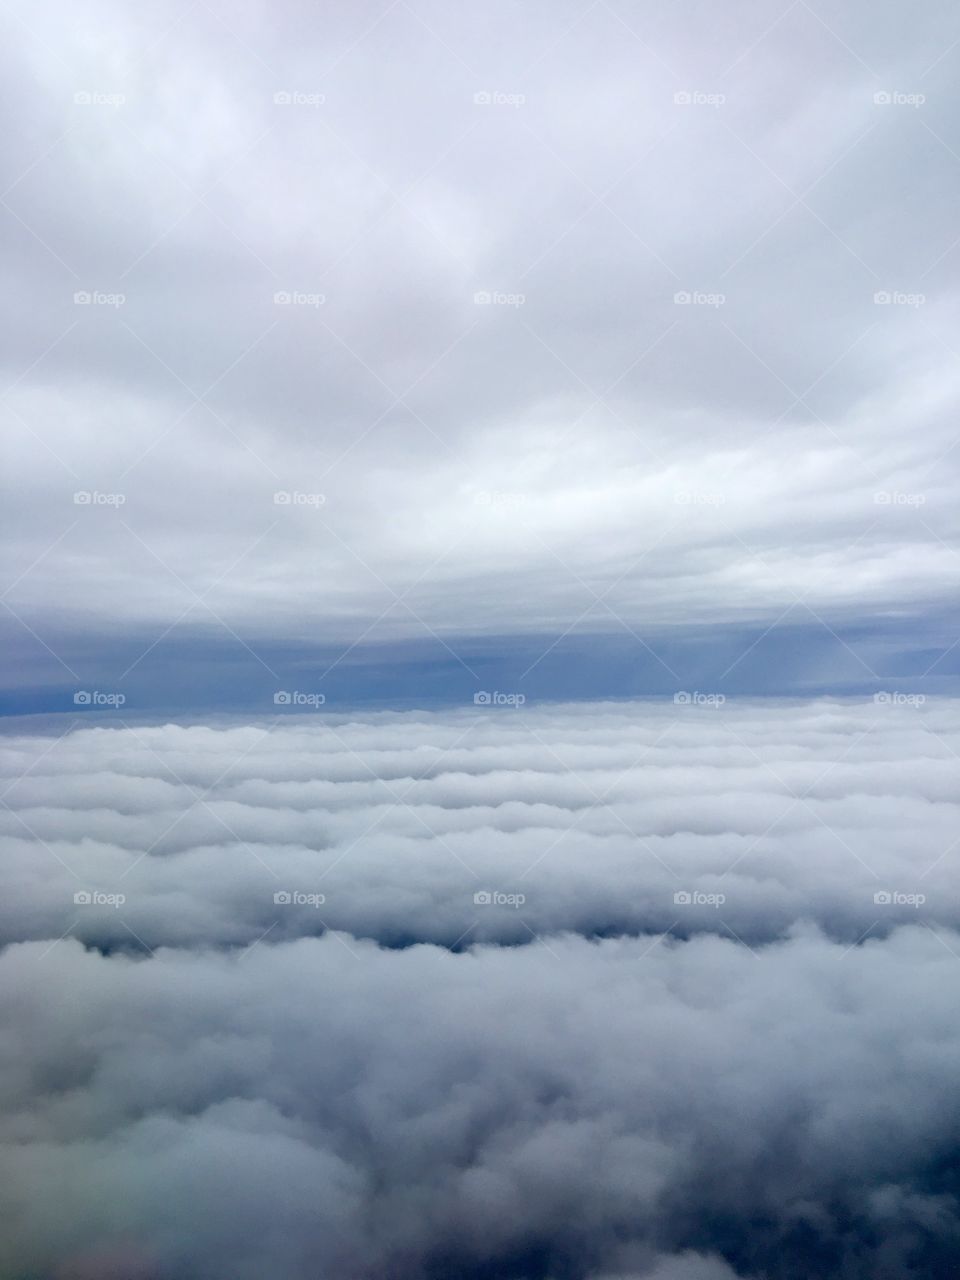 Clouds from airplane